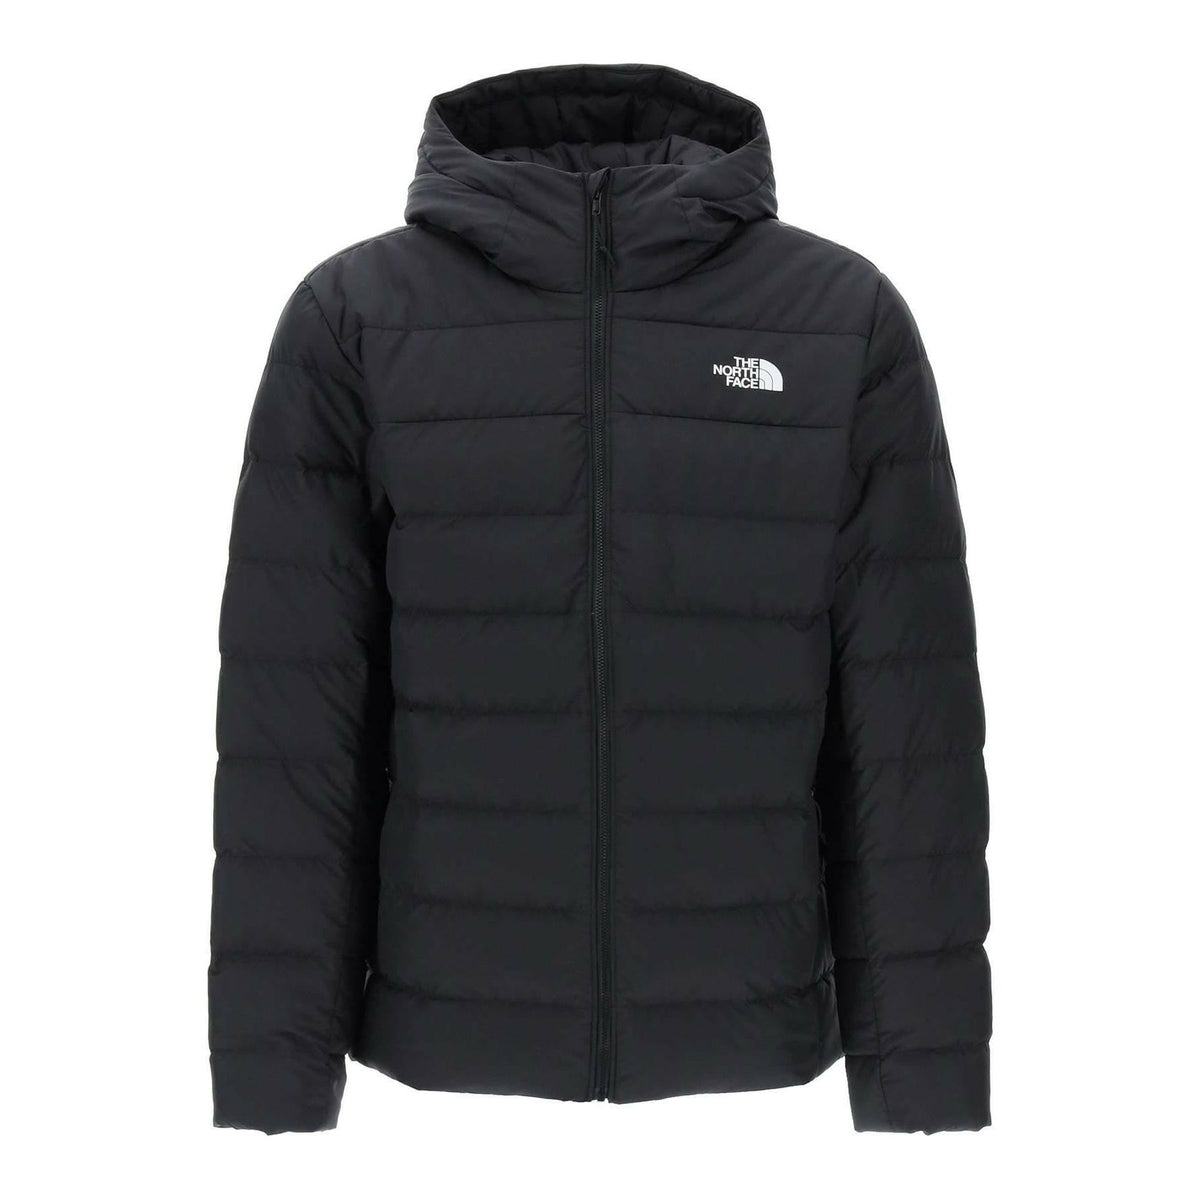 Black Aconcagua Iii Lightweight Puffer Jacket with recycled down THE NORTH FACE JOHN JULIA.